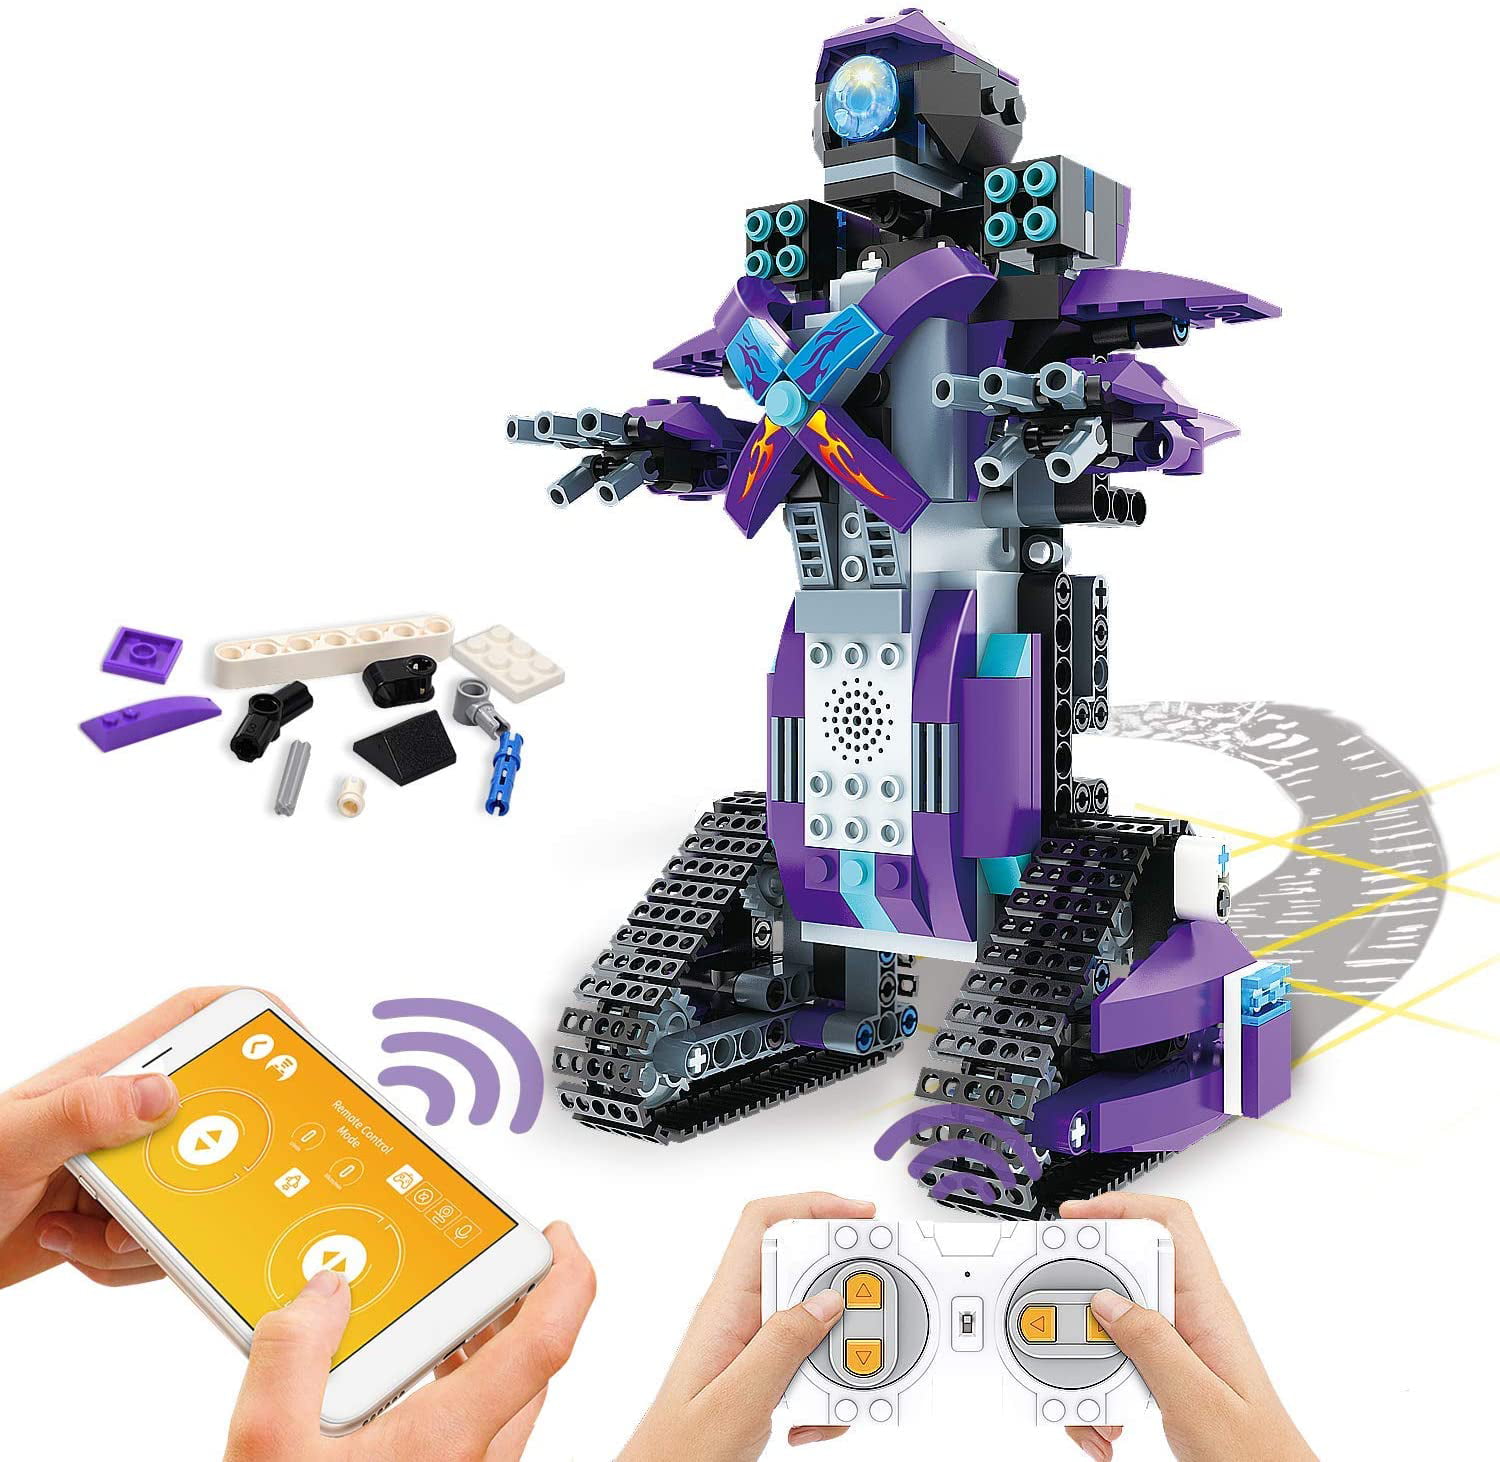 GARUNK STEM Robot Building Block for Kids Educational Construction Engineering Learning Toy Set for Boys Gift Age 5 6 7 8 9 10 11 12 Year Old 669 PCS 25 in 1 City Project Robot Building Bricks Toys 